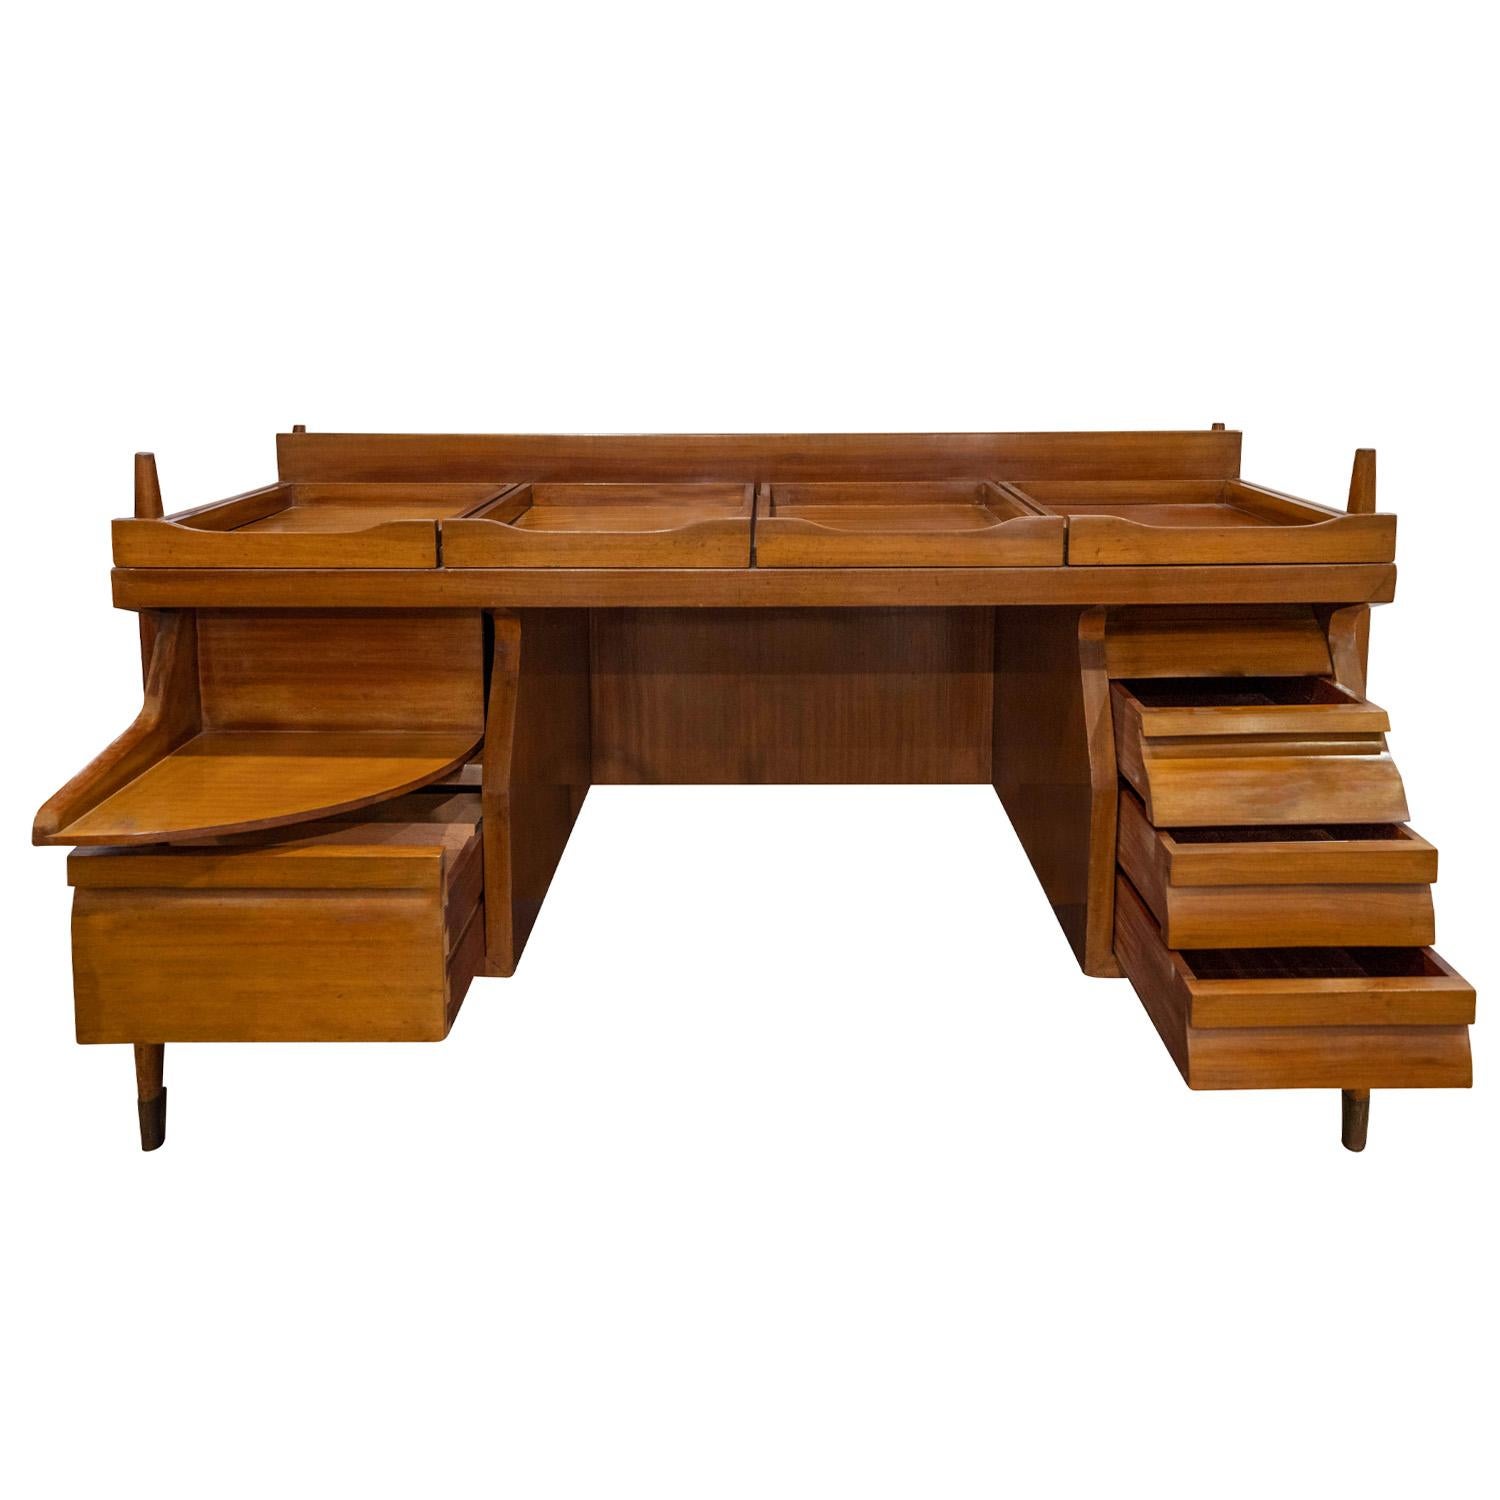 Mid-20th Century Ico Parisi Attributed Sculptural Desk With Glass Top 1950s For Sale